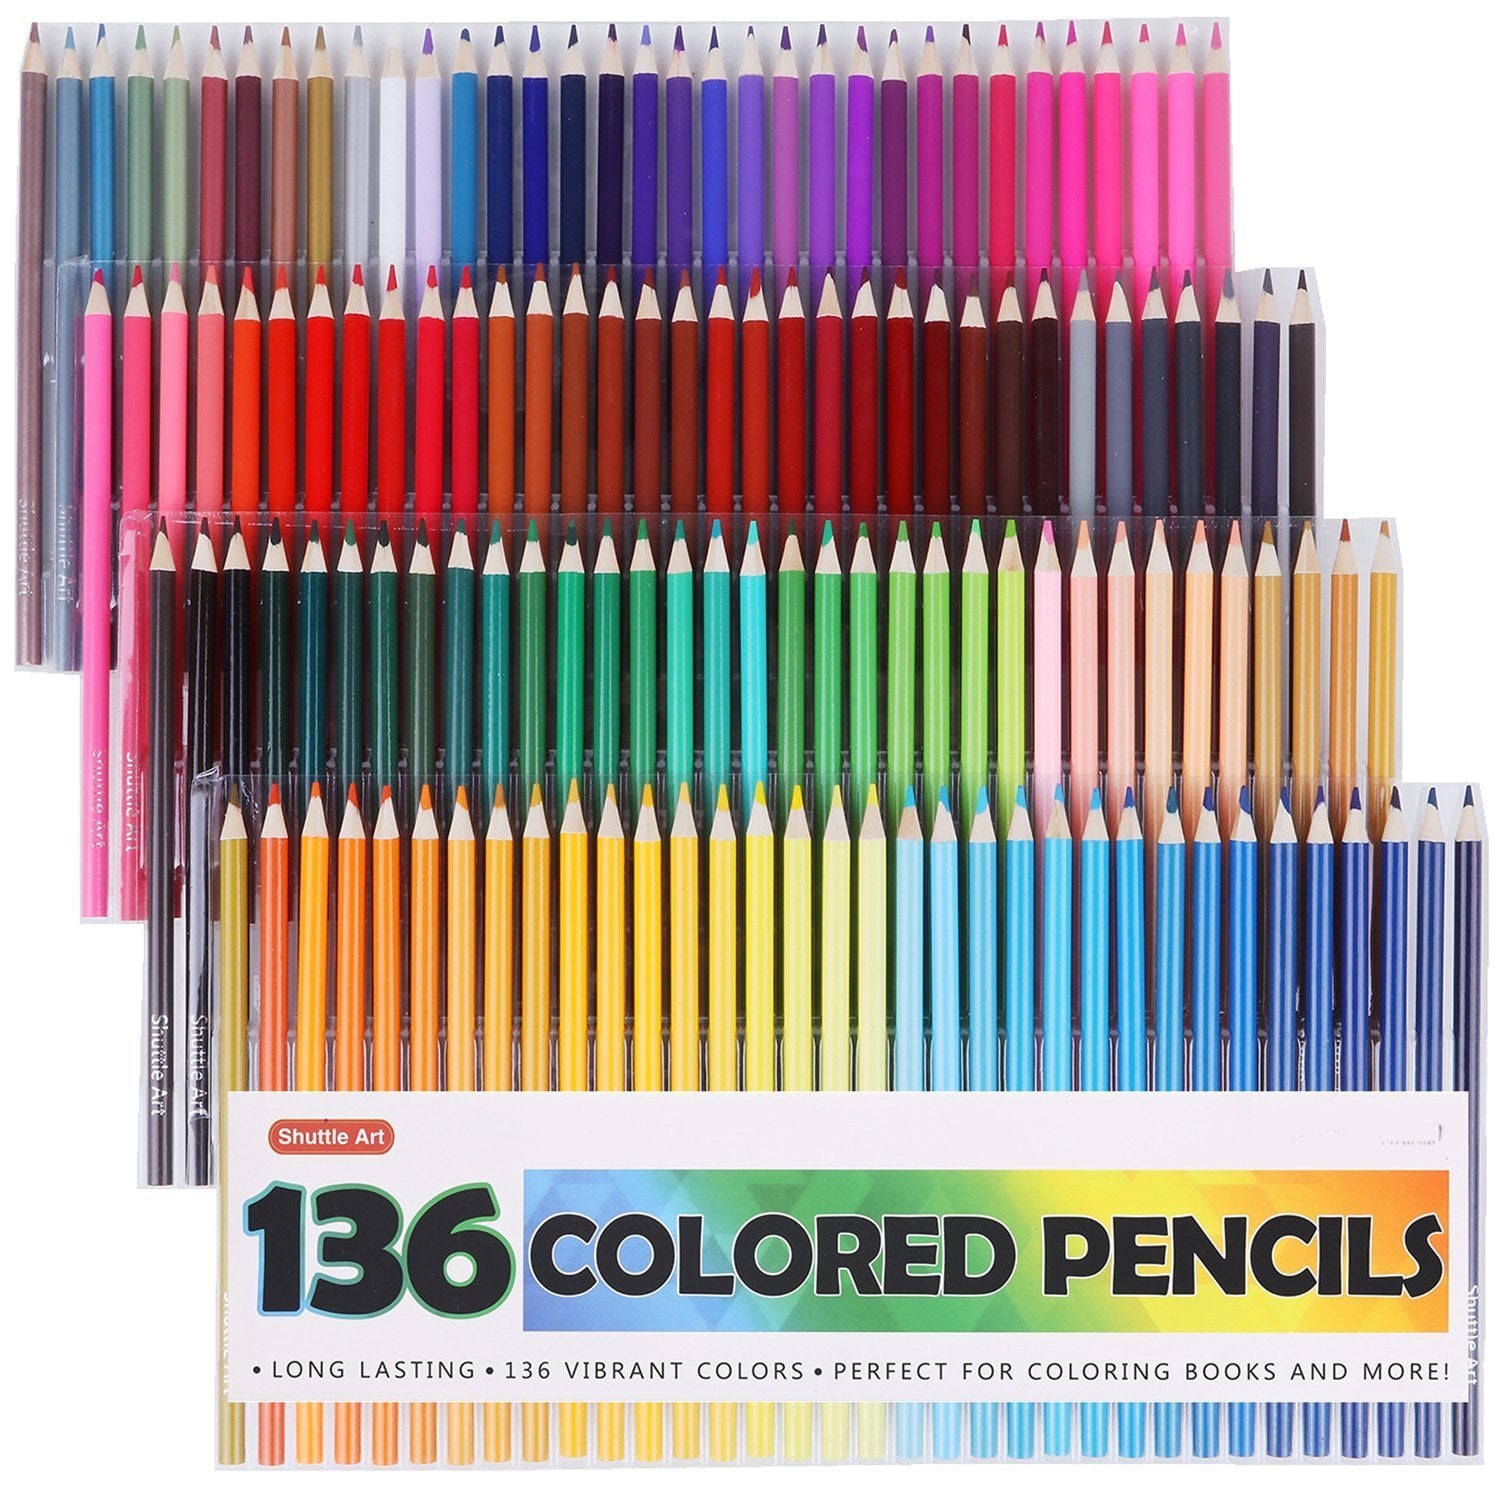 136 Colored Pencils,Colored Pencil Set for Adult Coloring Books